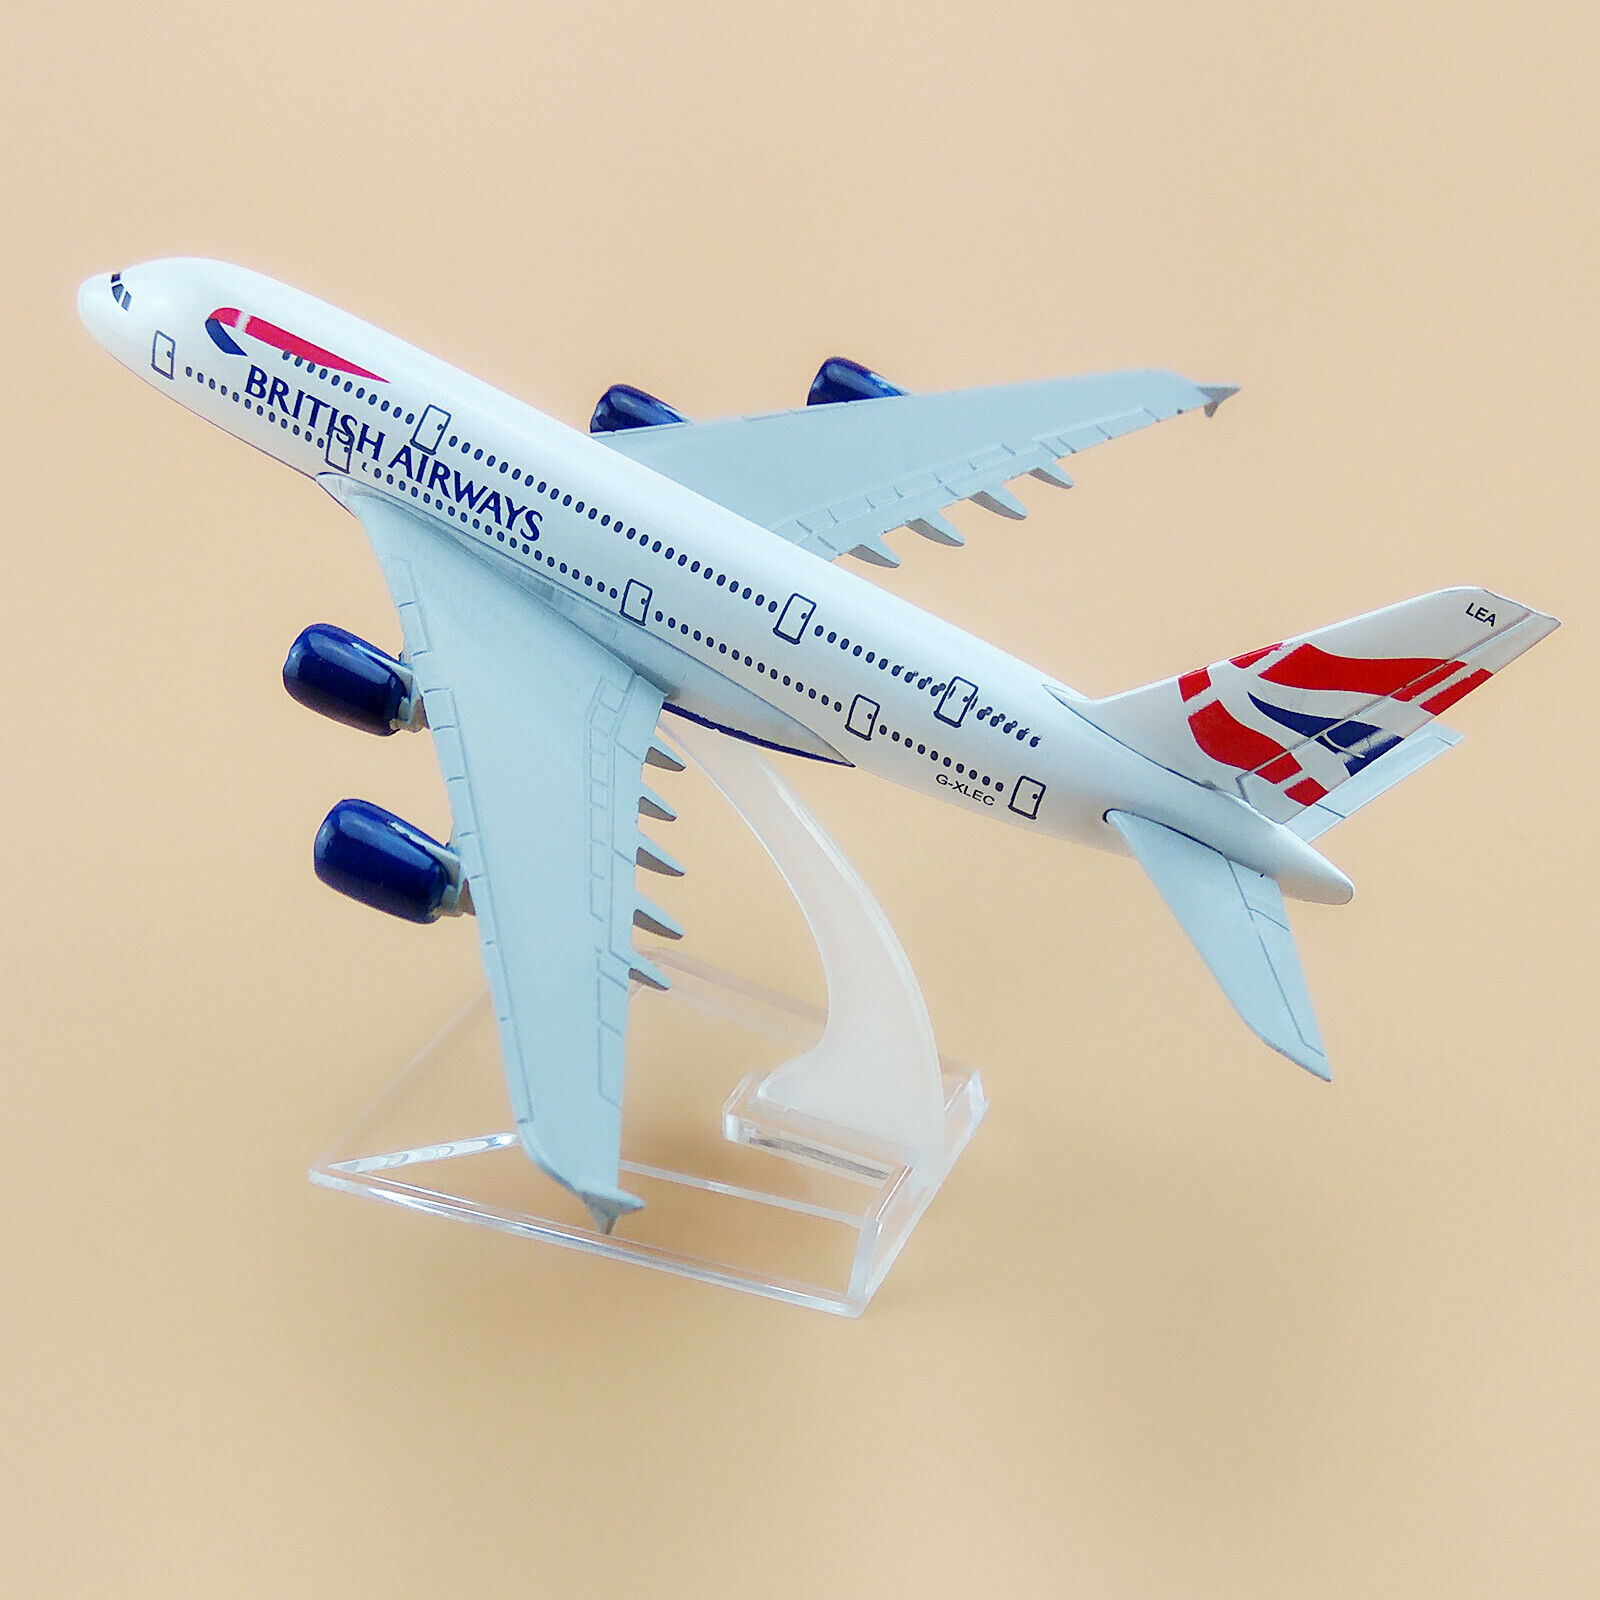 British Airways Airbus A380 Airlines Airplane Model Plane Metal Aircraft 16cm